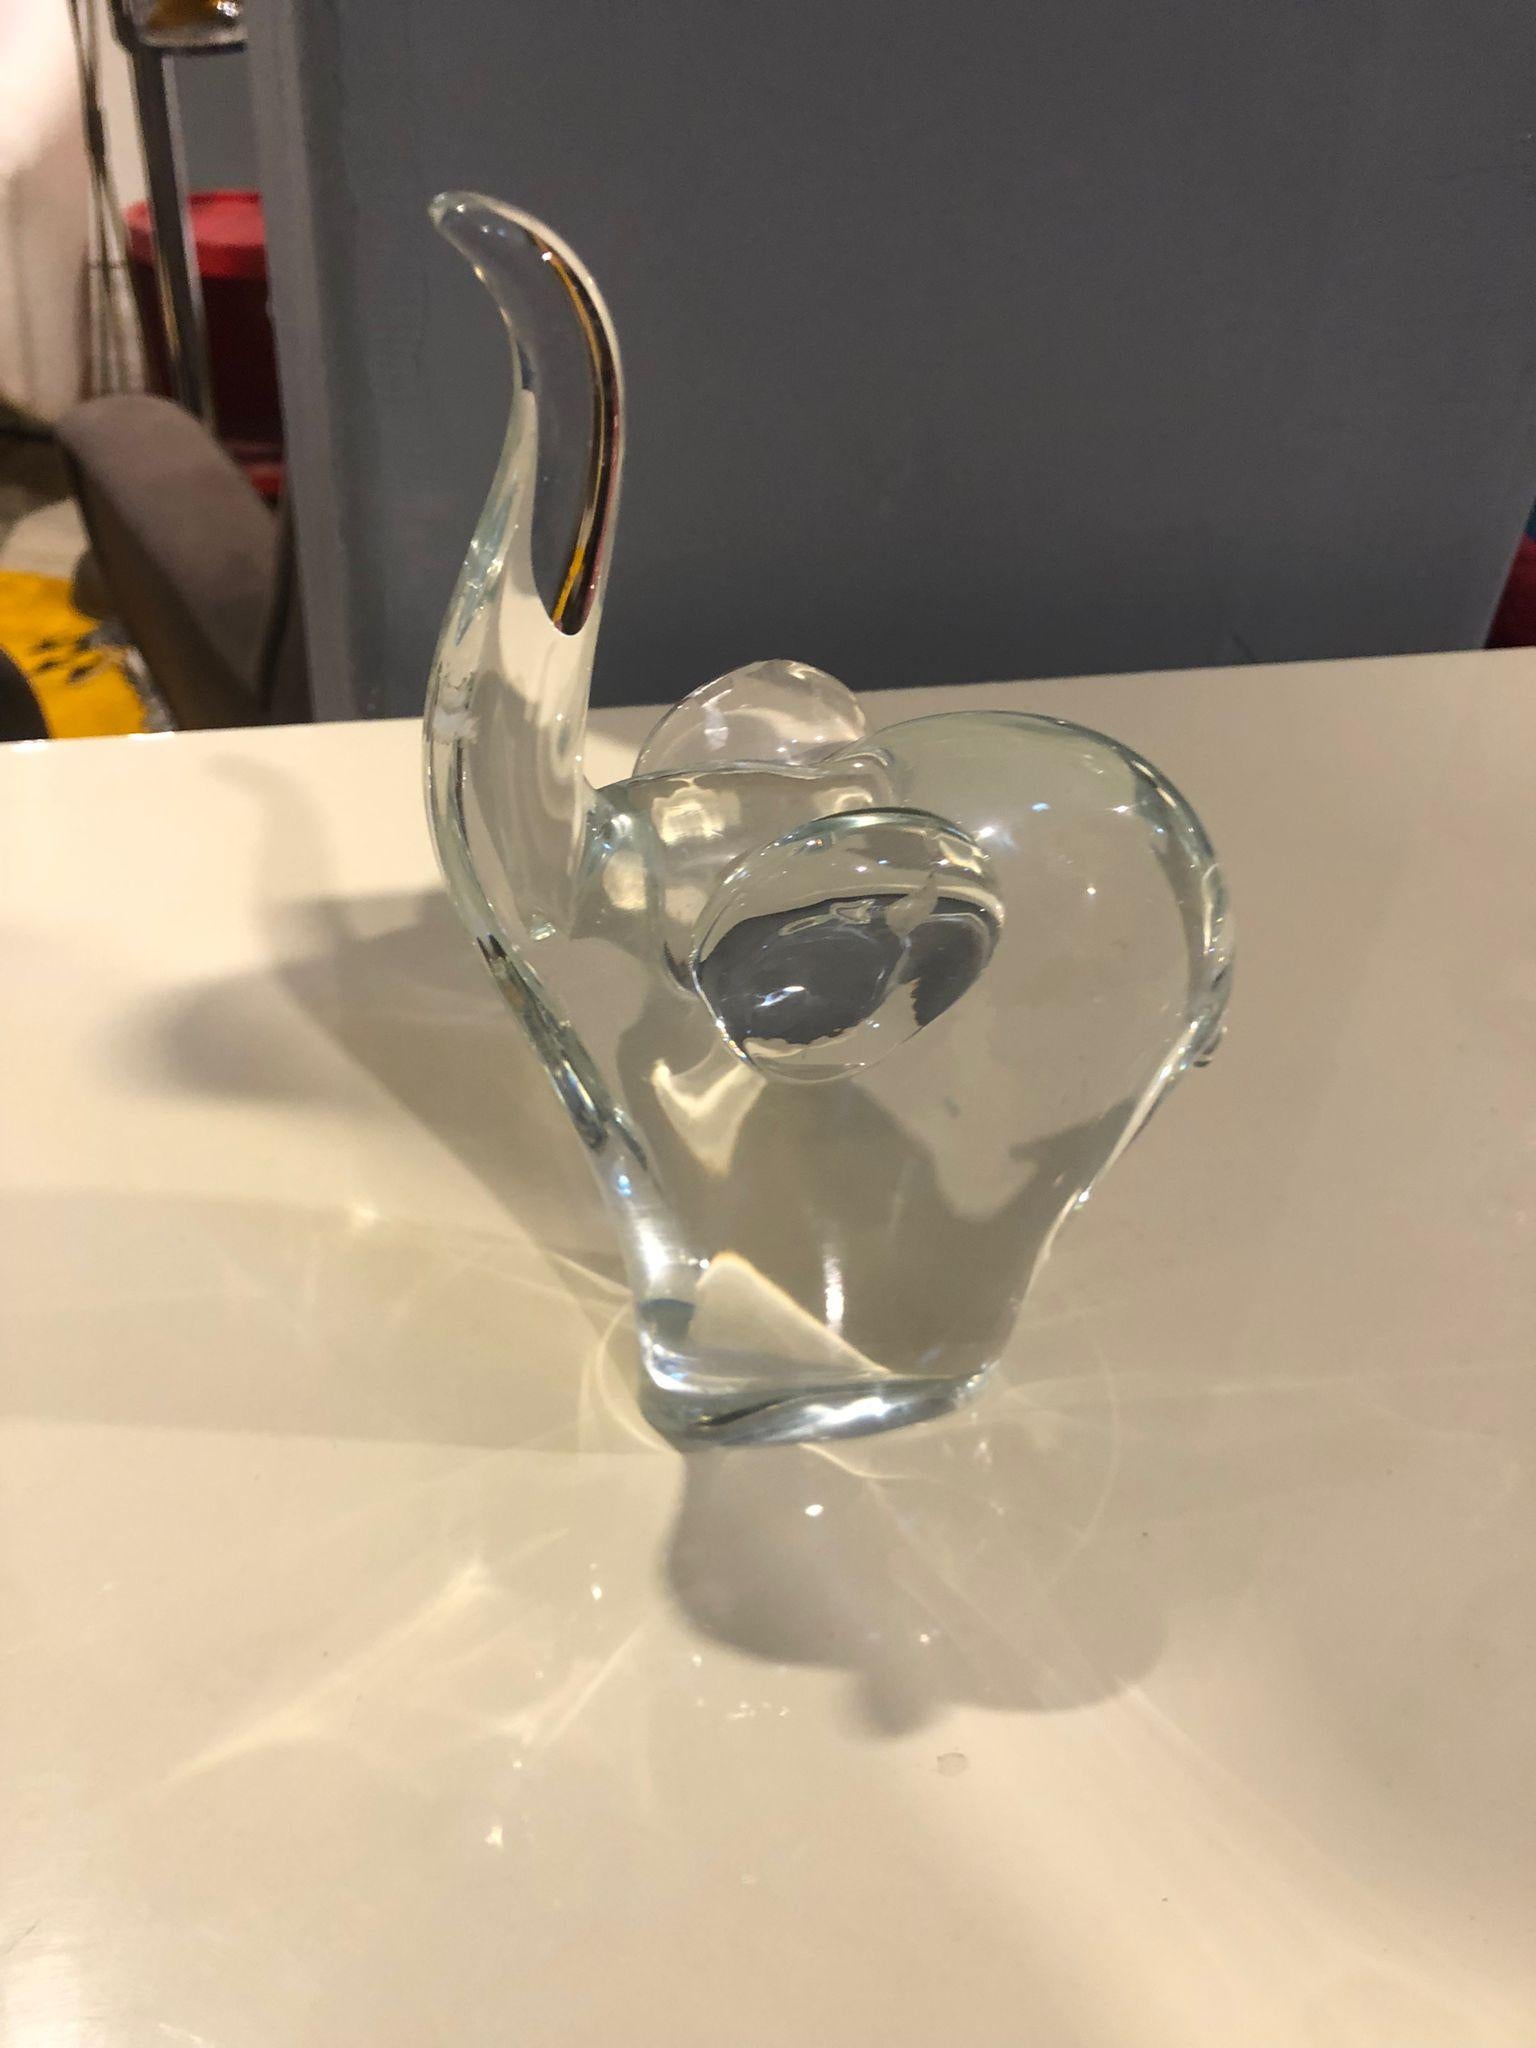 This 1980s Italian handmade Murano glass sculpture depicts an elephant in clear glass. This sculpture is in excellent condition and has no scratches or chips. This item is a perfect addition to a home or office decor ready to be appreciated and